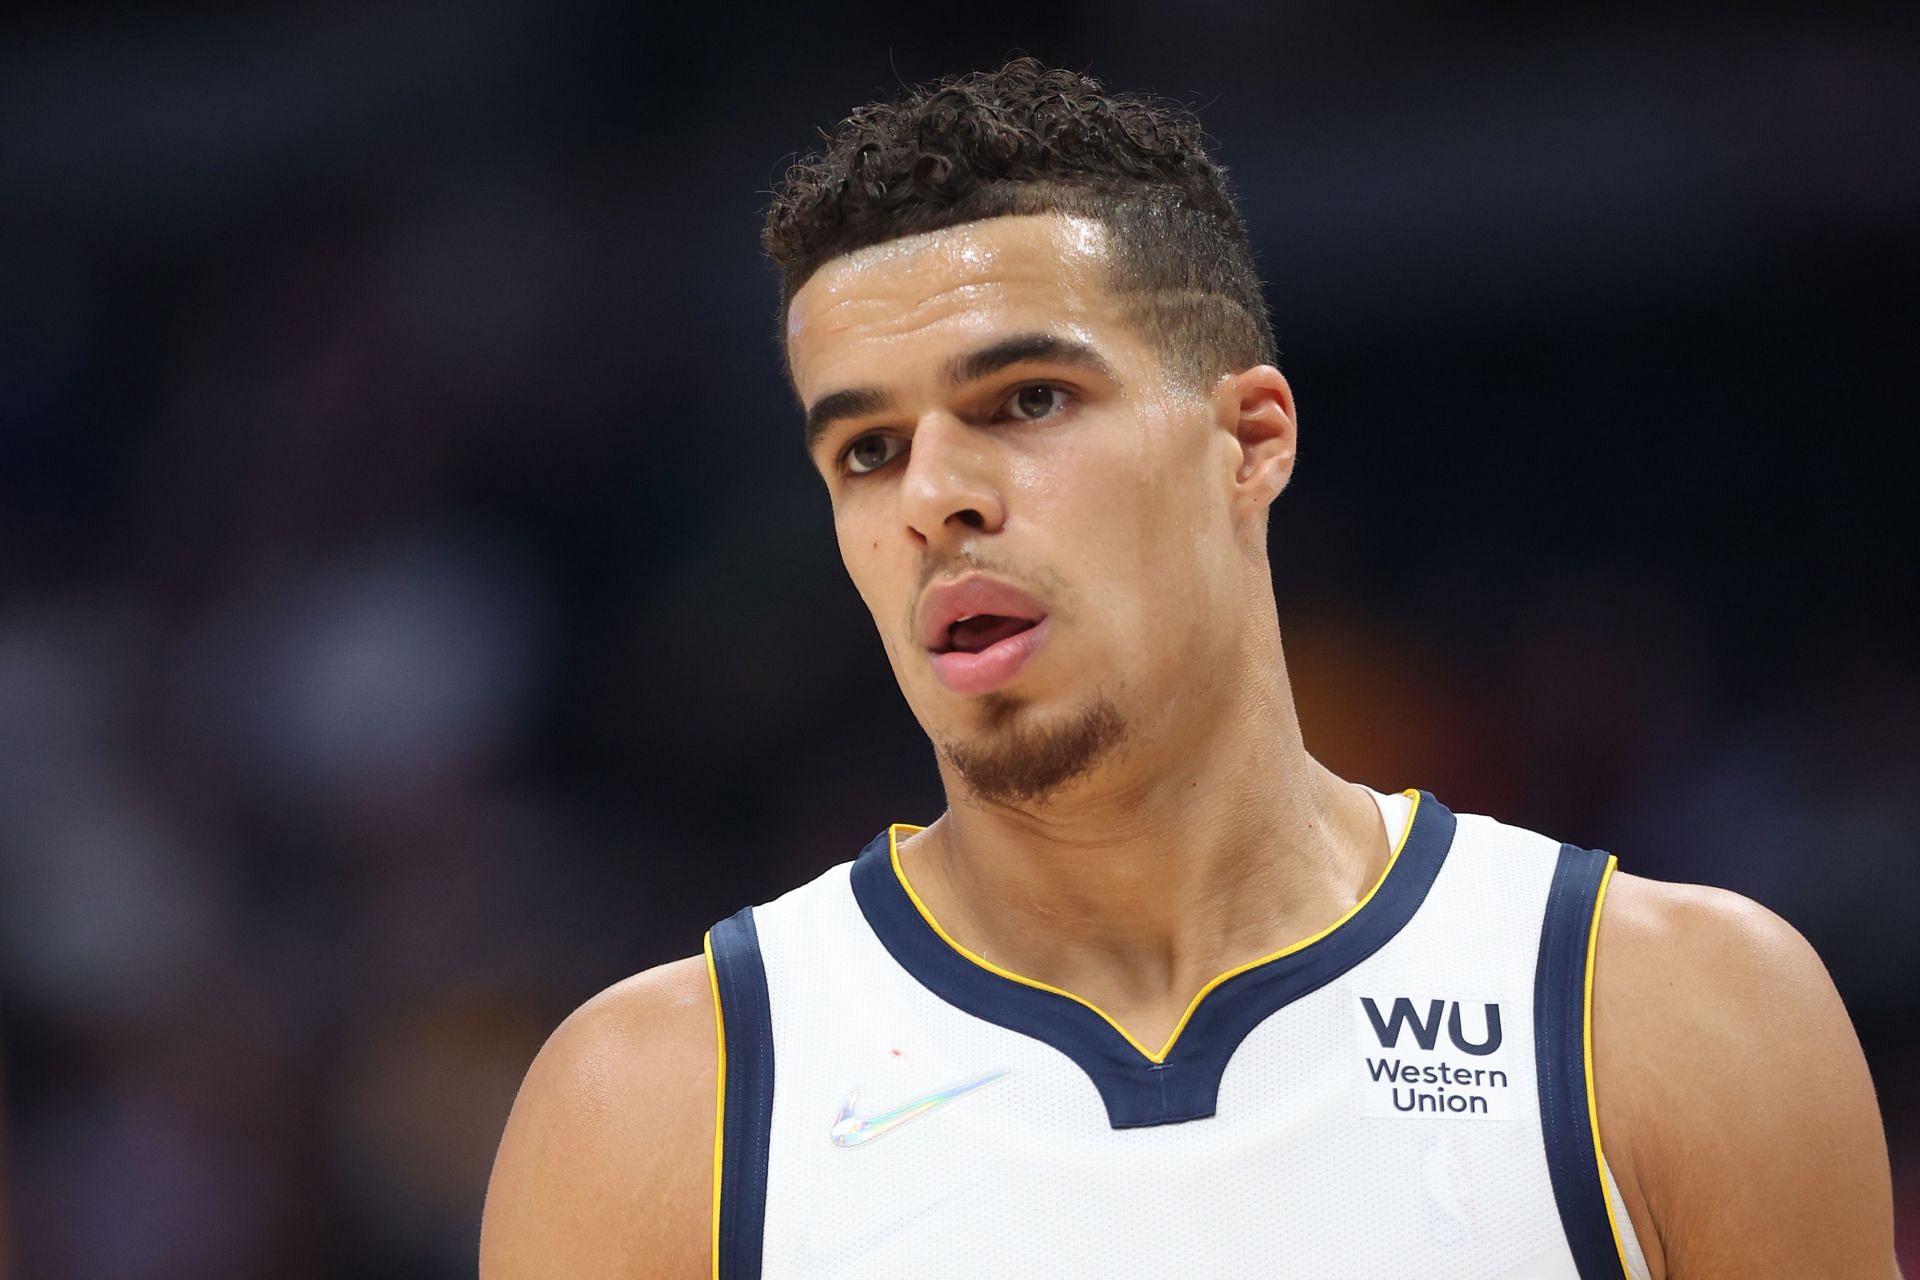 After hard-earned NBA journey, Michael Porter Jr. unfazed by Finals  shooting woes